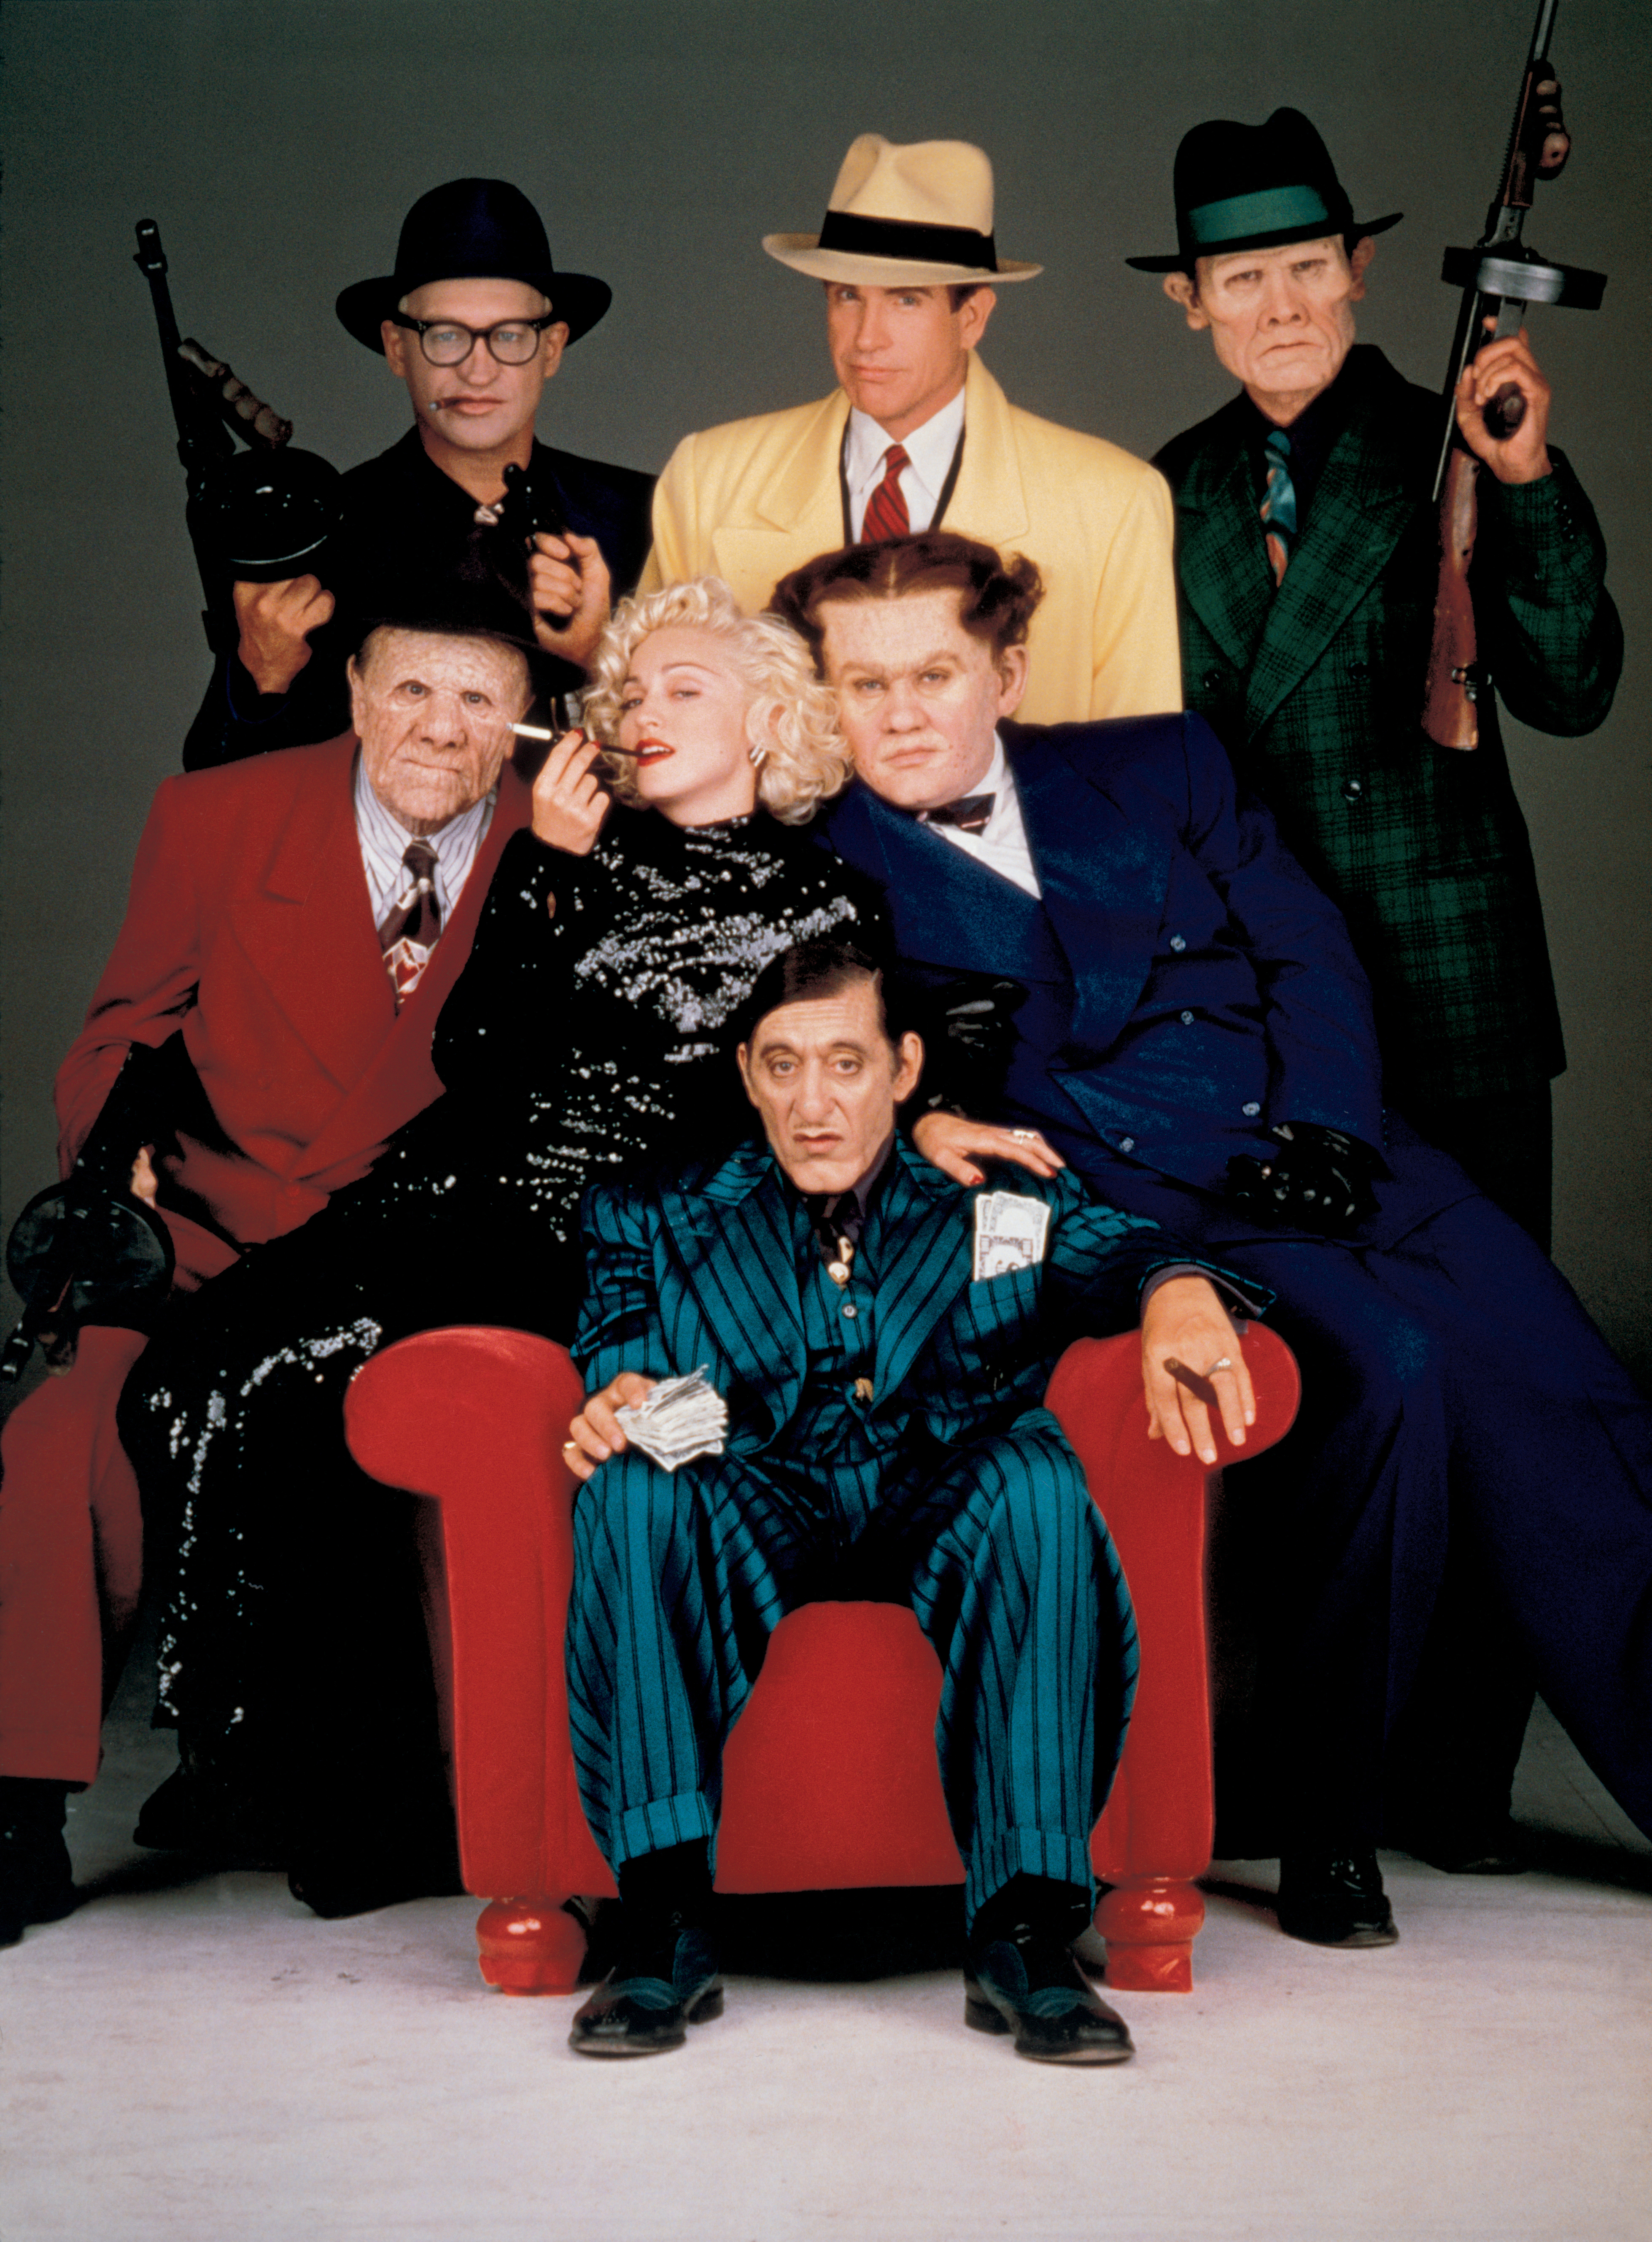 Madonna, Al Pacino, Warren Beatty, William Forsythe, R.G. Armstrong, Ed O'Ross, and Henry Silva in Dick Tracy (1990)